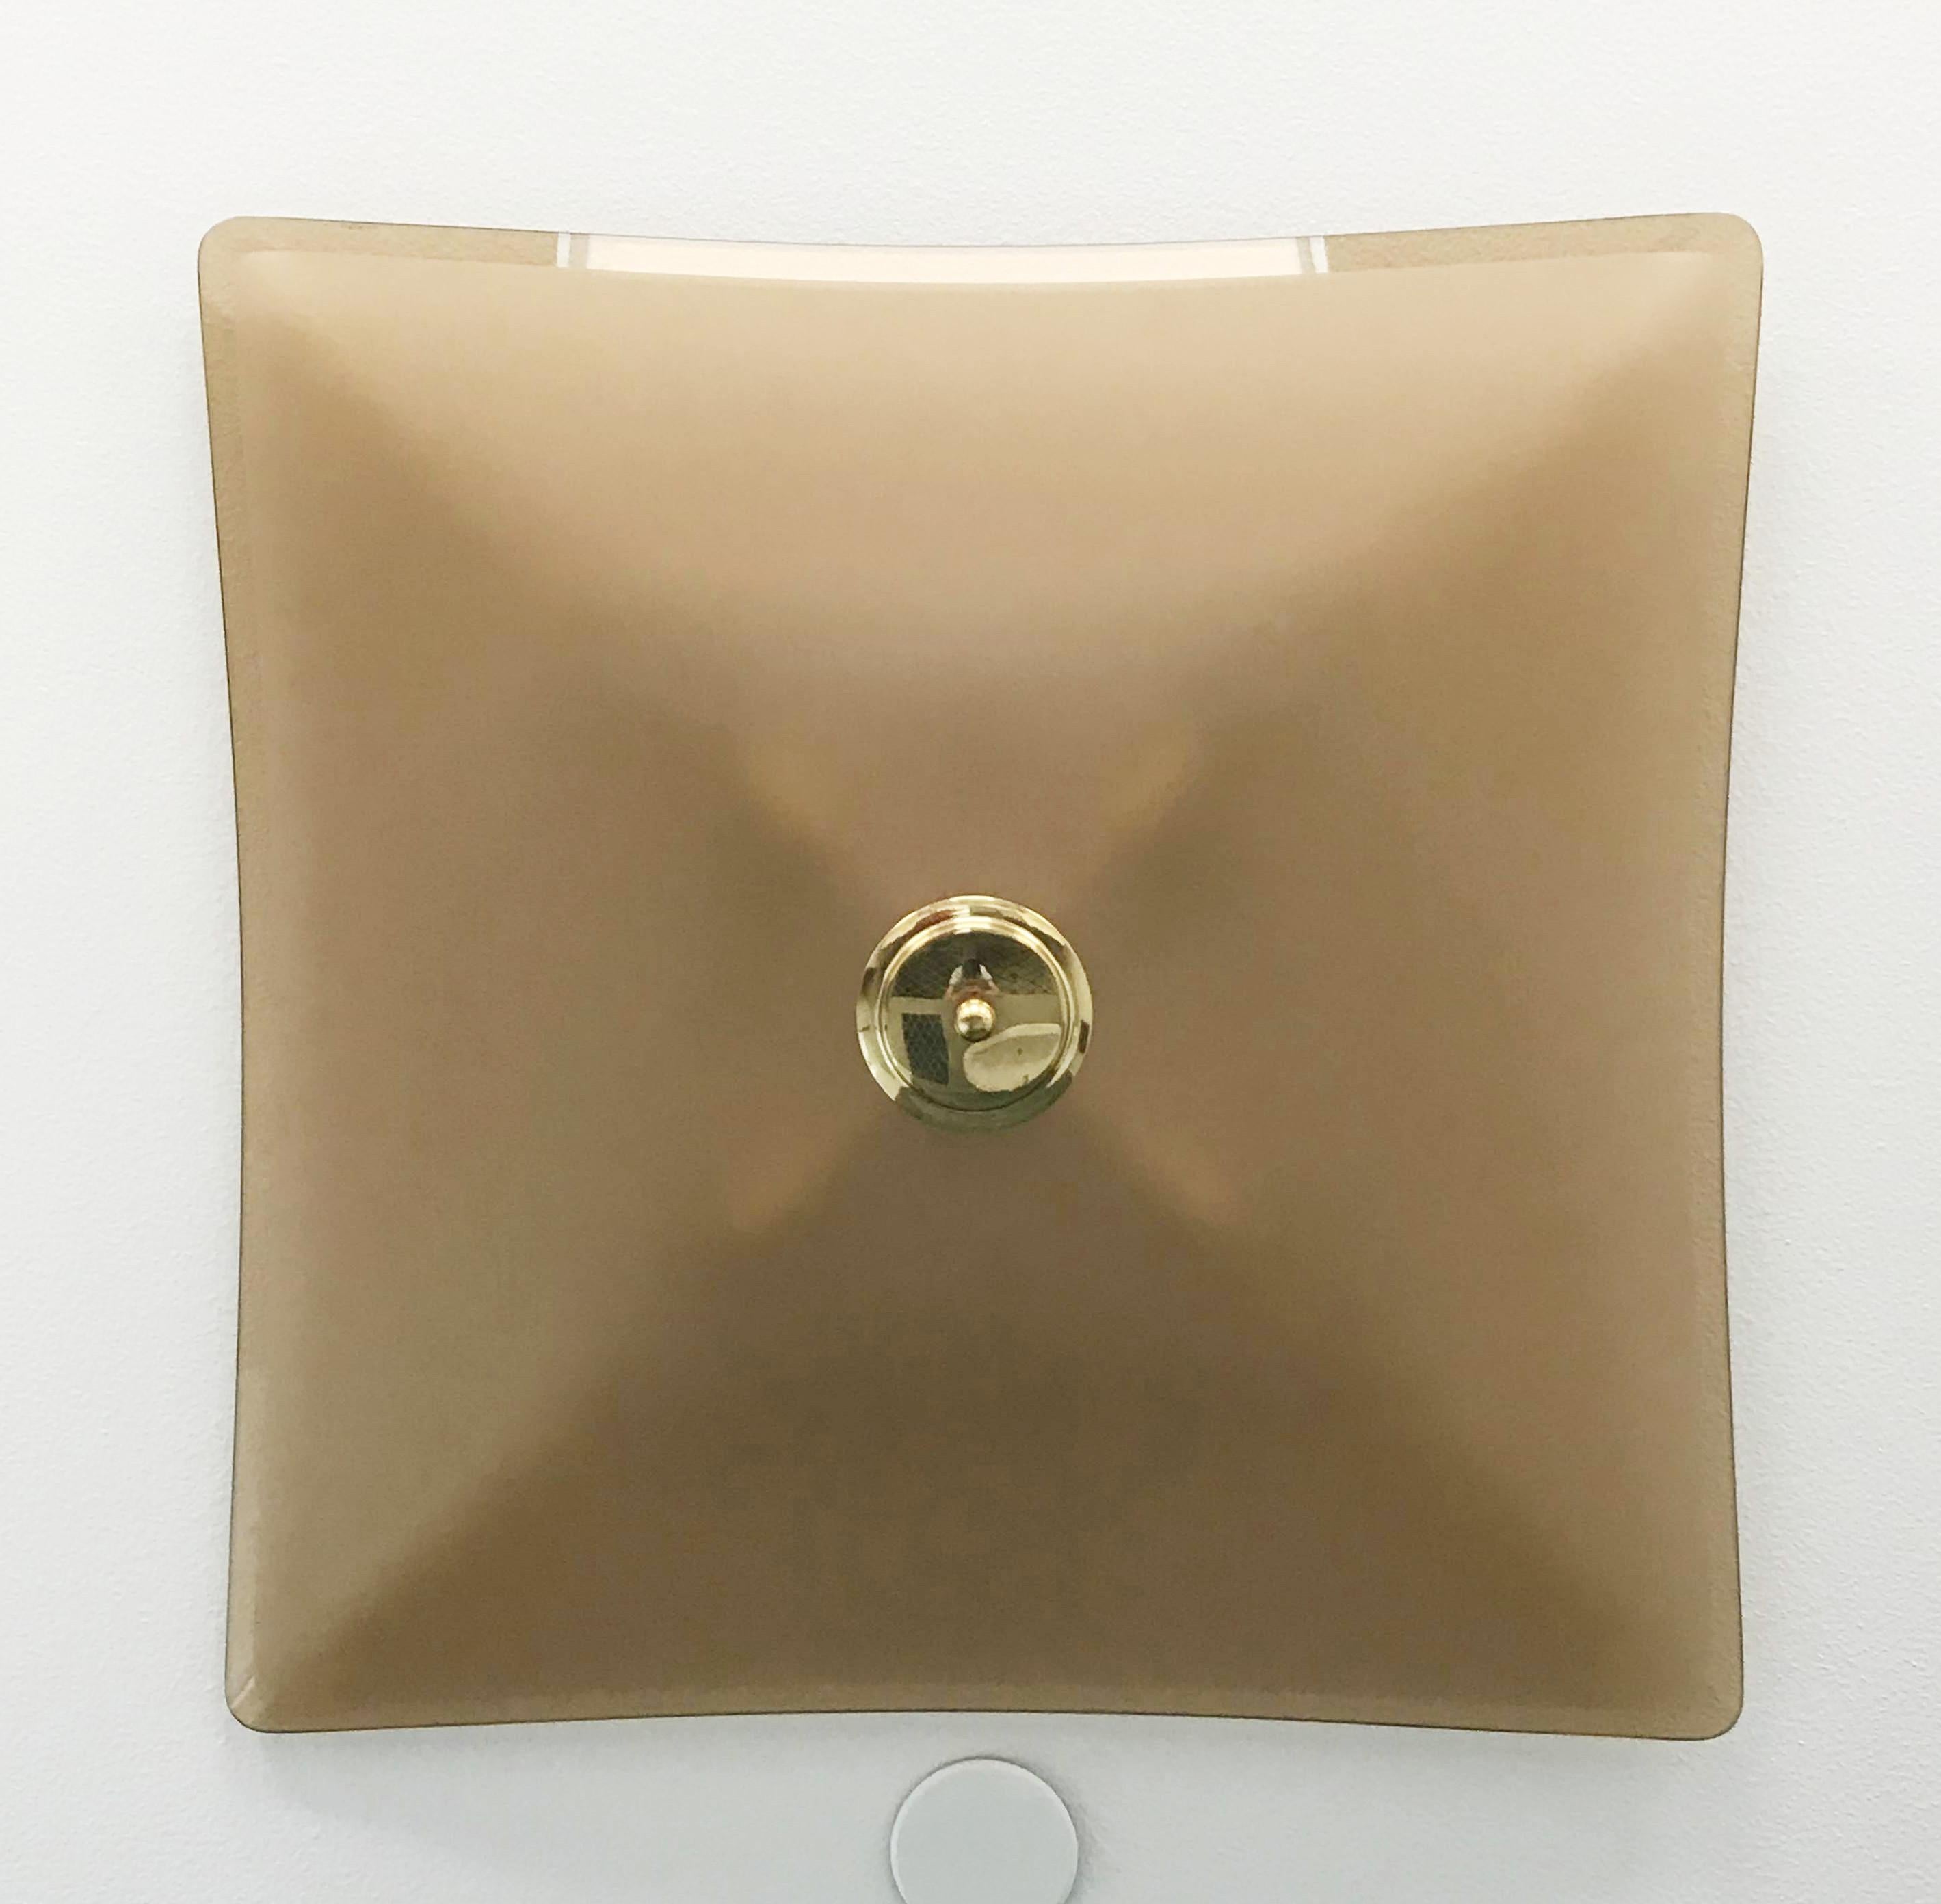 Elegant Italian flush mounts or wall sconces, composed of single smoky colored glass diffusers with beveled edge and satin center, mounted with brass finials on painted white back plates / Made in Italy, circa 1960s.
4 lights / E12 or E14 type / max